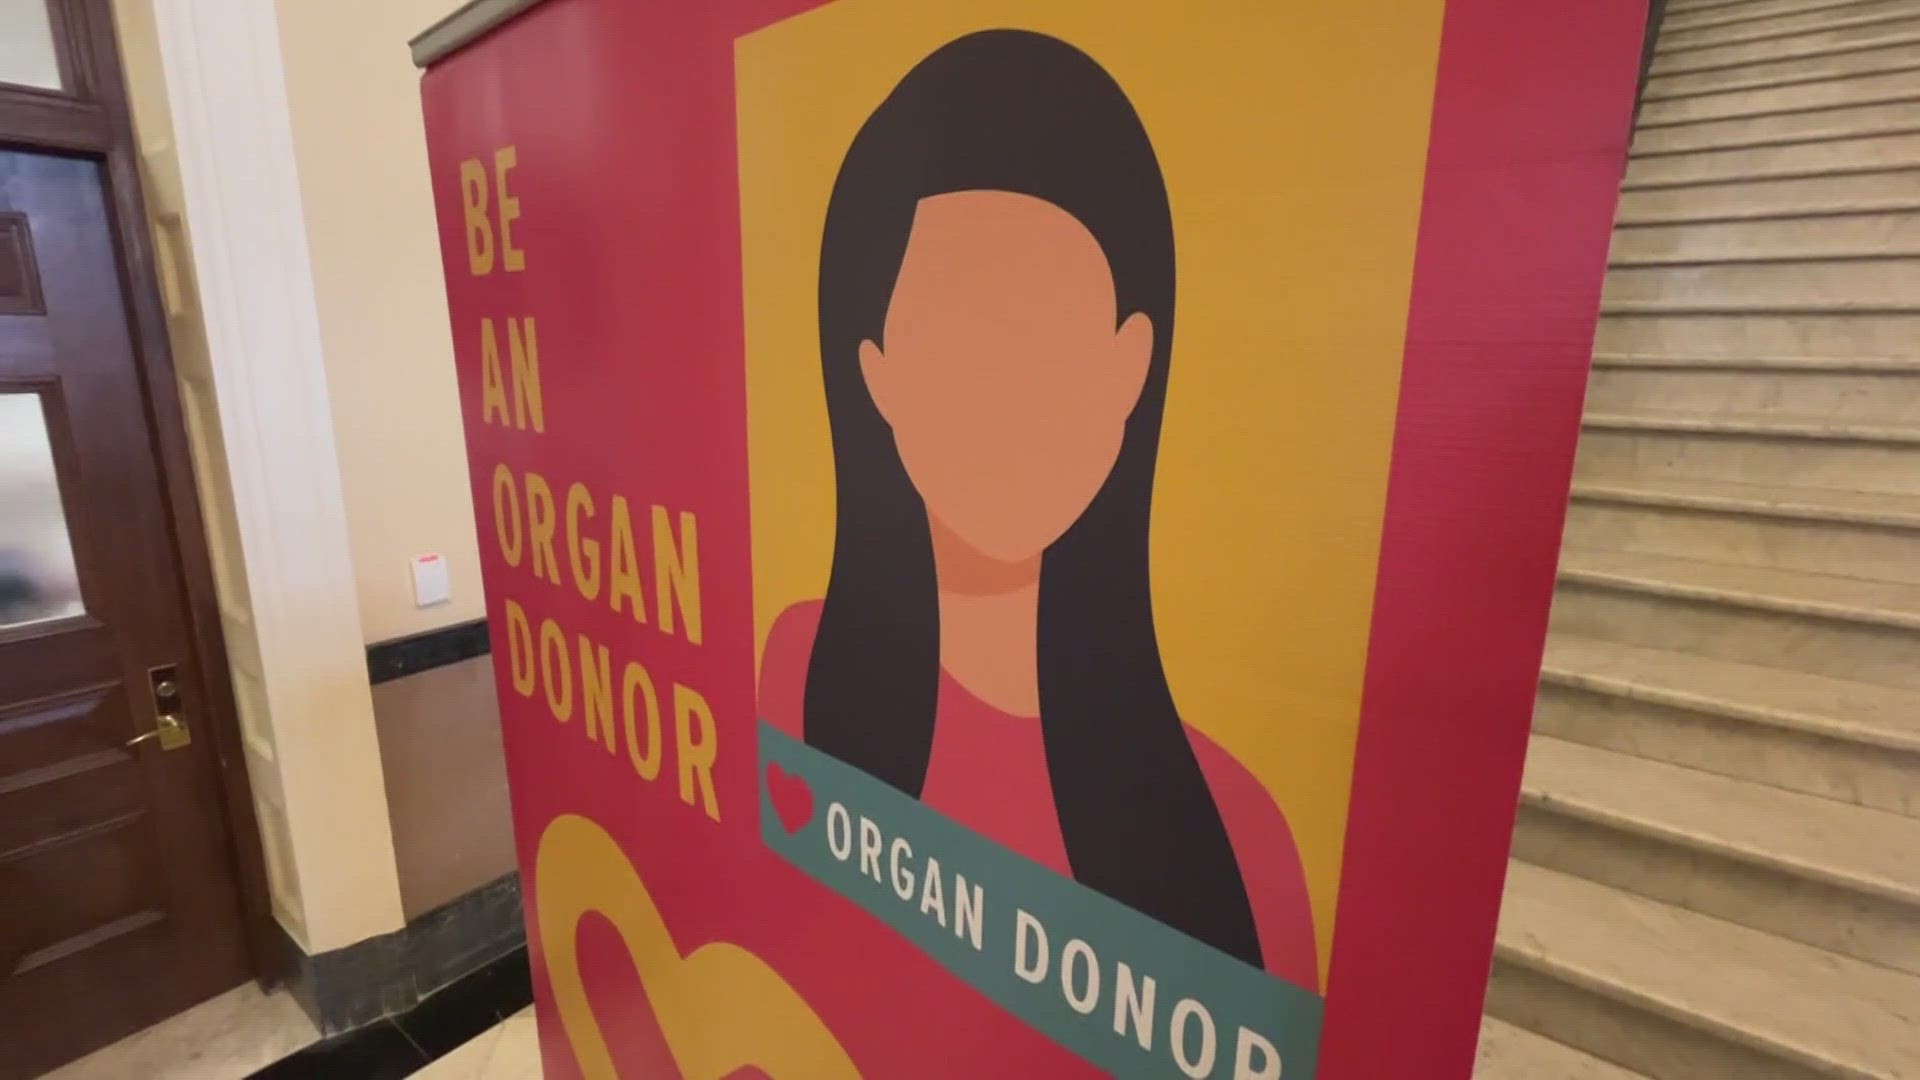 A little under 60 percent of Mainers are currently registered on the state organ donor list.